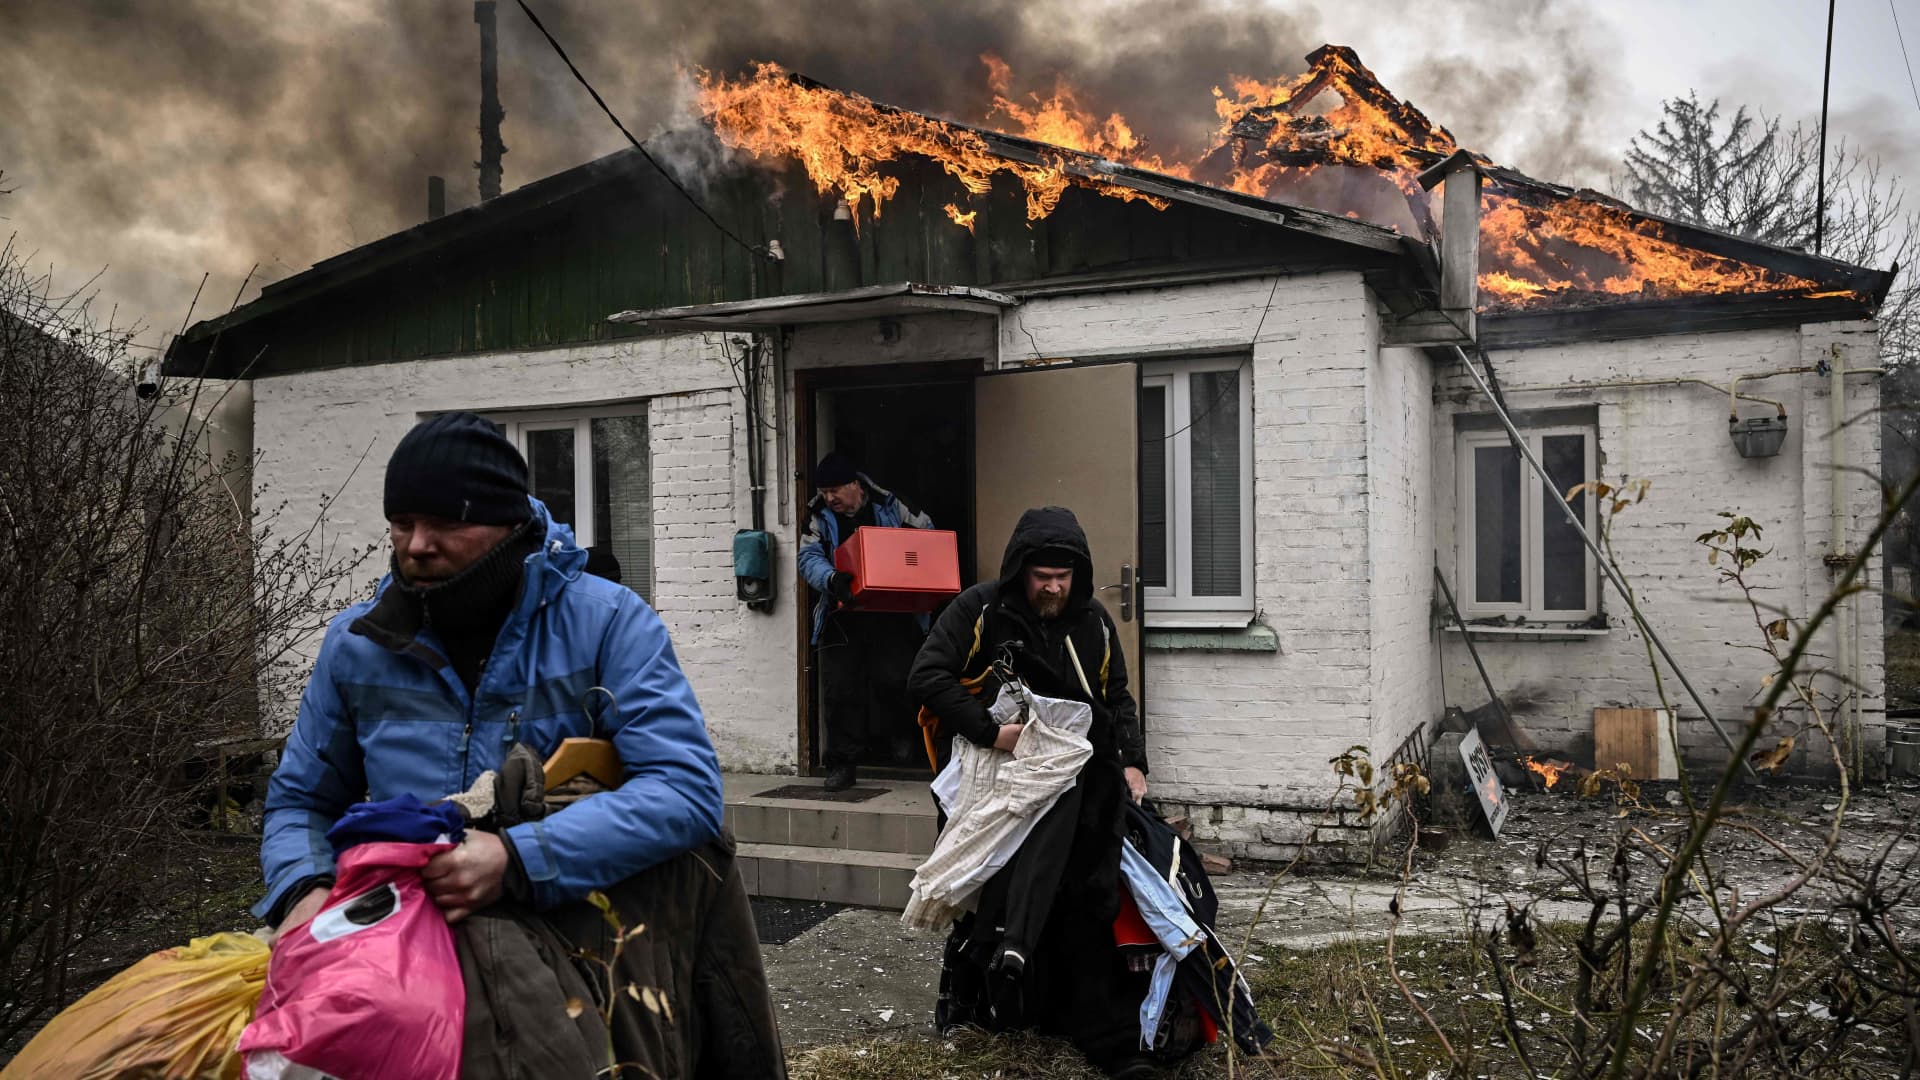  People remove personal belongings from a burning house after being shelled in the city of Irpin, outside Kyiv, on March 4, 2022.